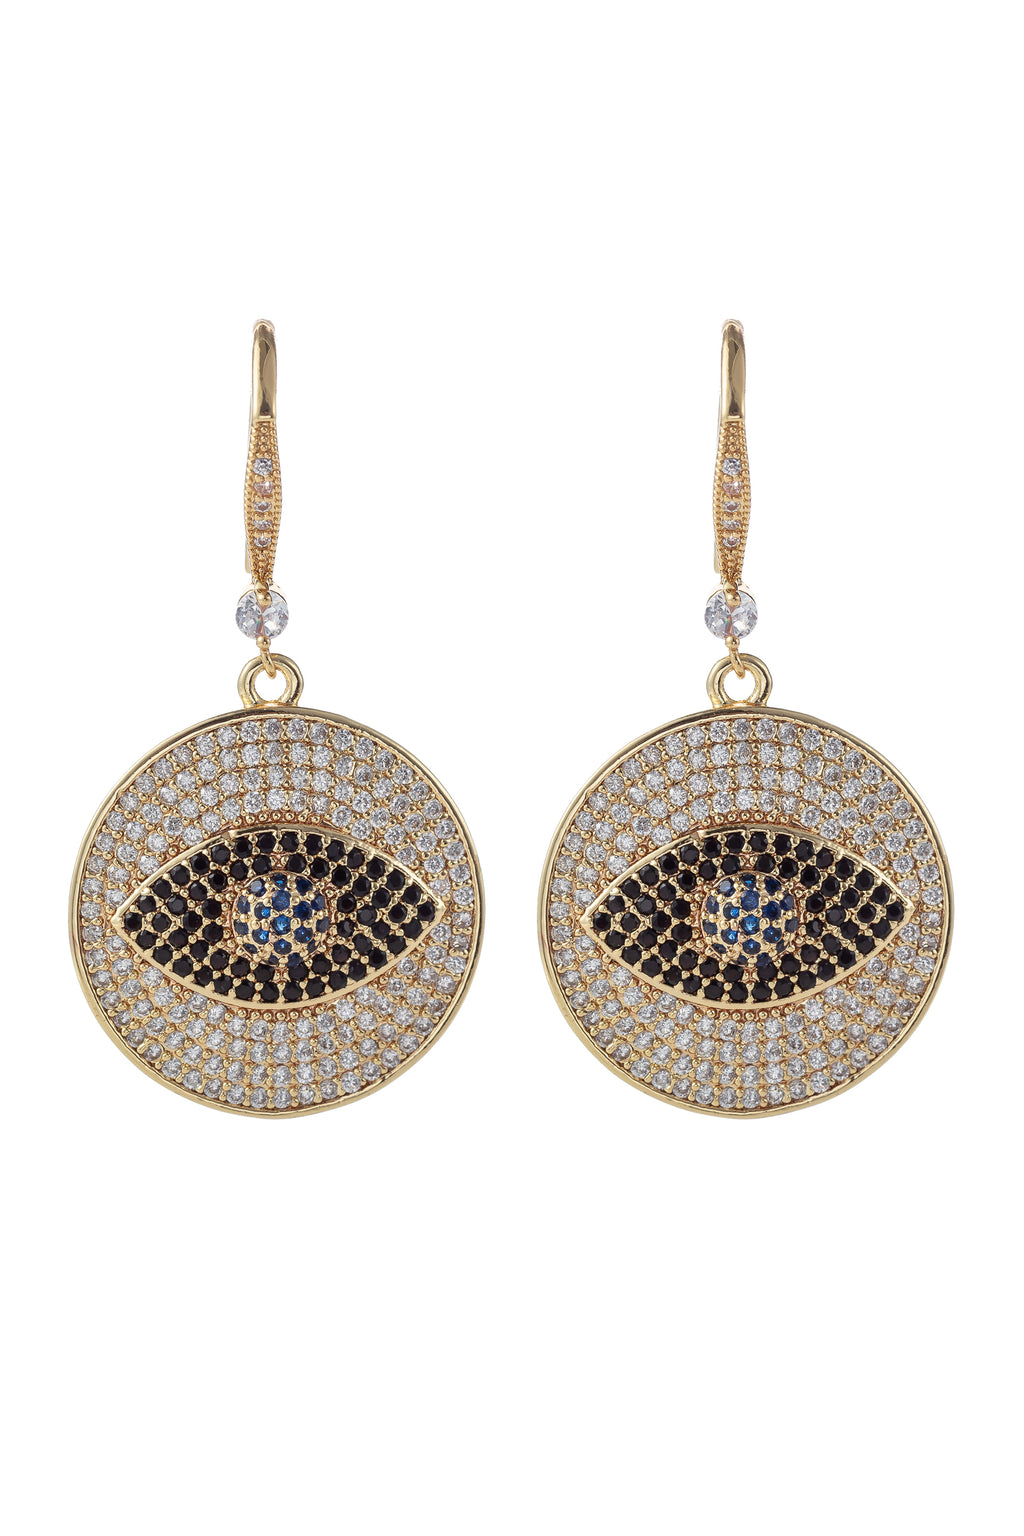 18k gold plated evil eye earrings studded with CZ crystals.